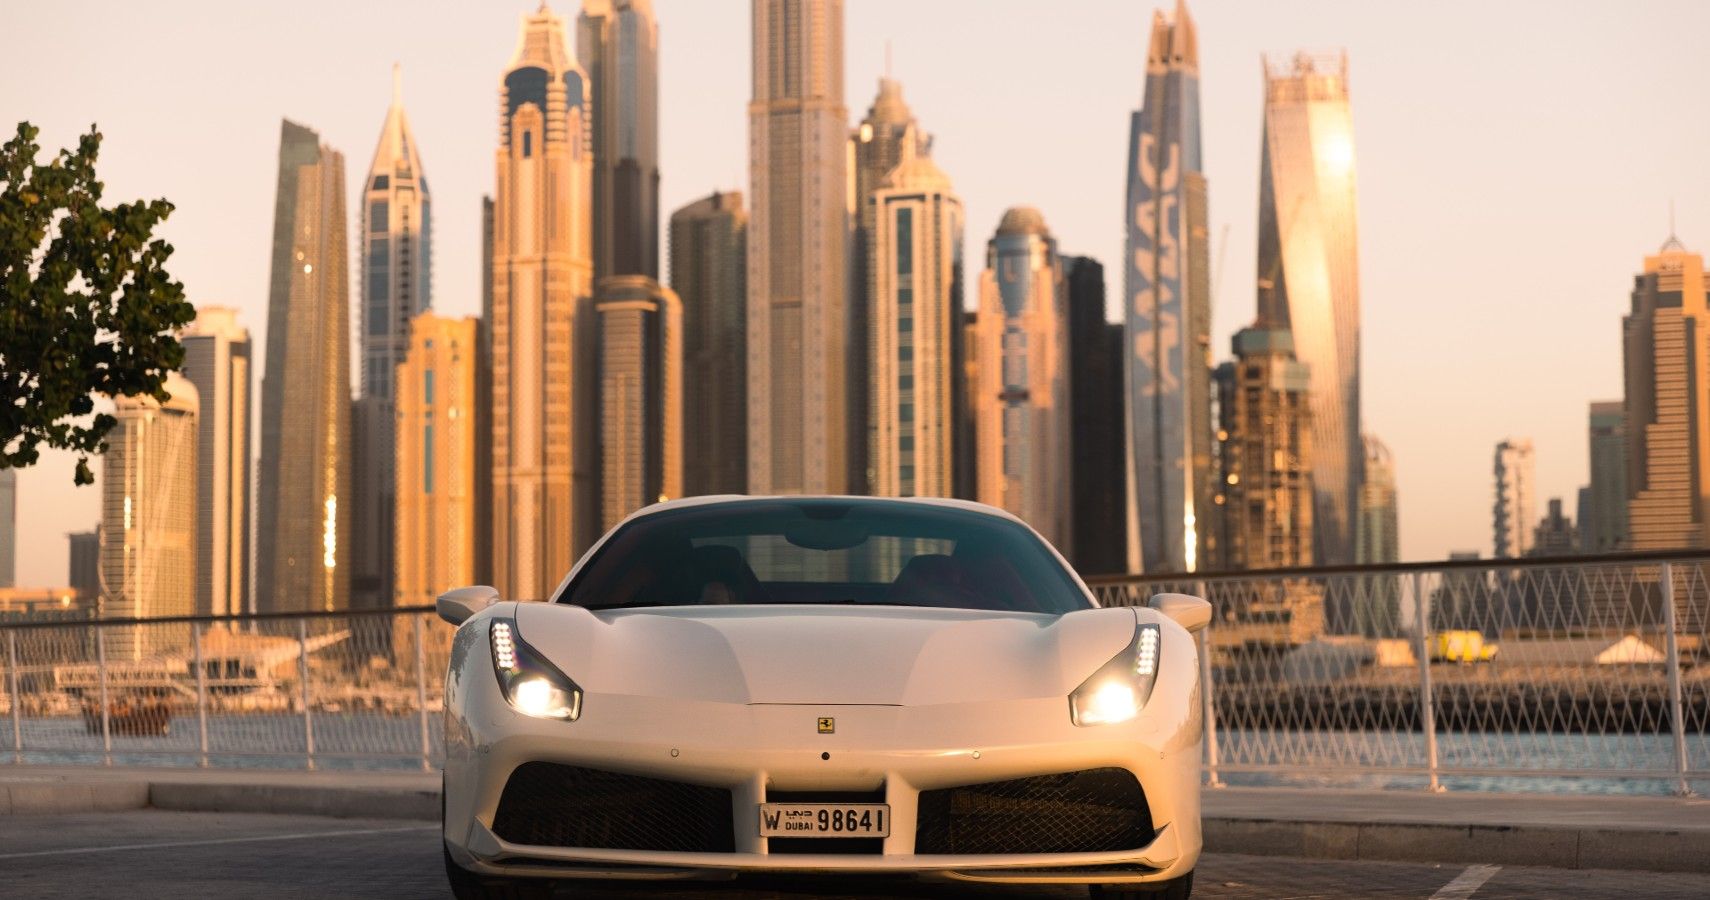 The True Story Behind The Abandoned Supercars In Dubai And What Happens To Them